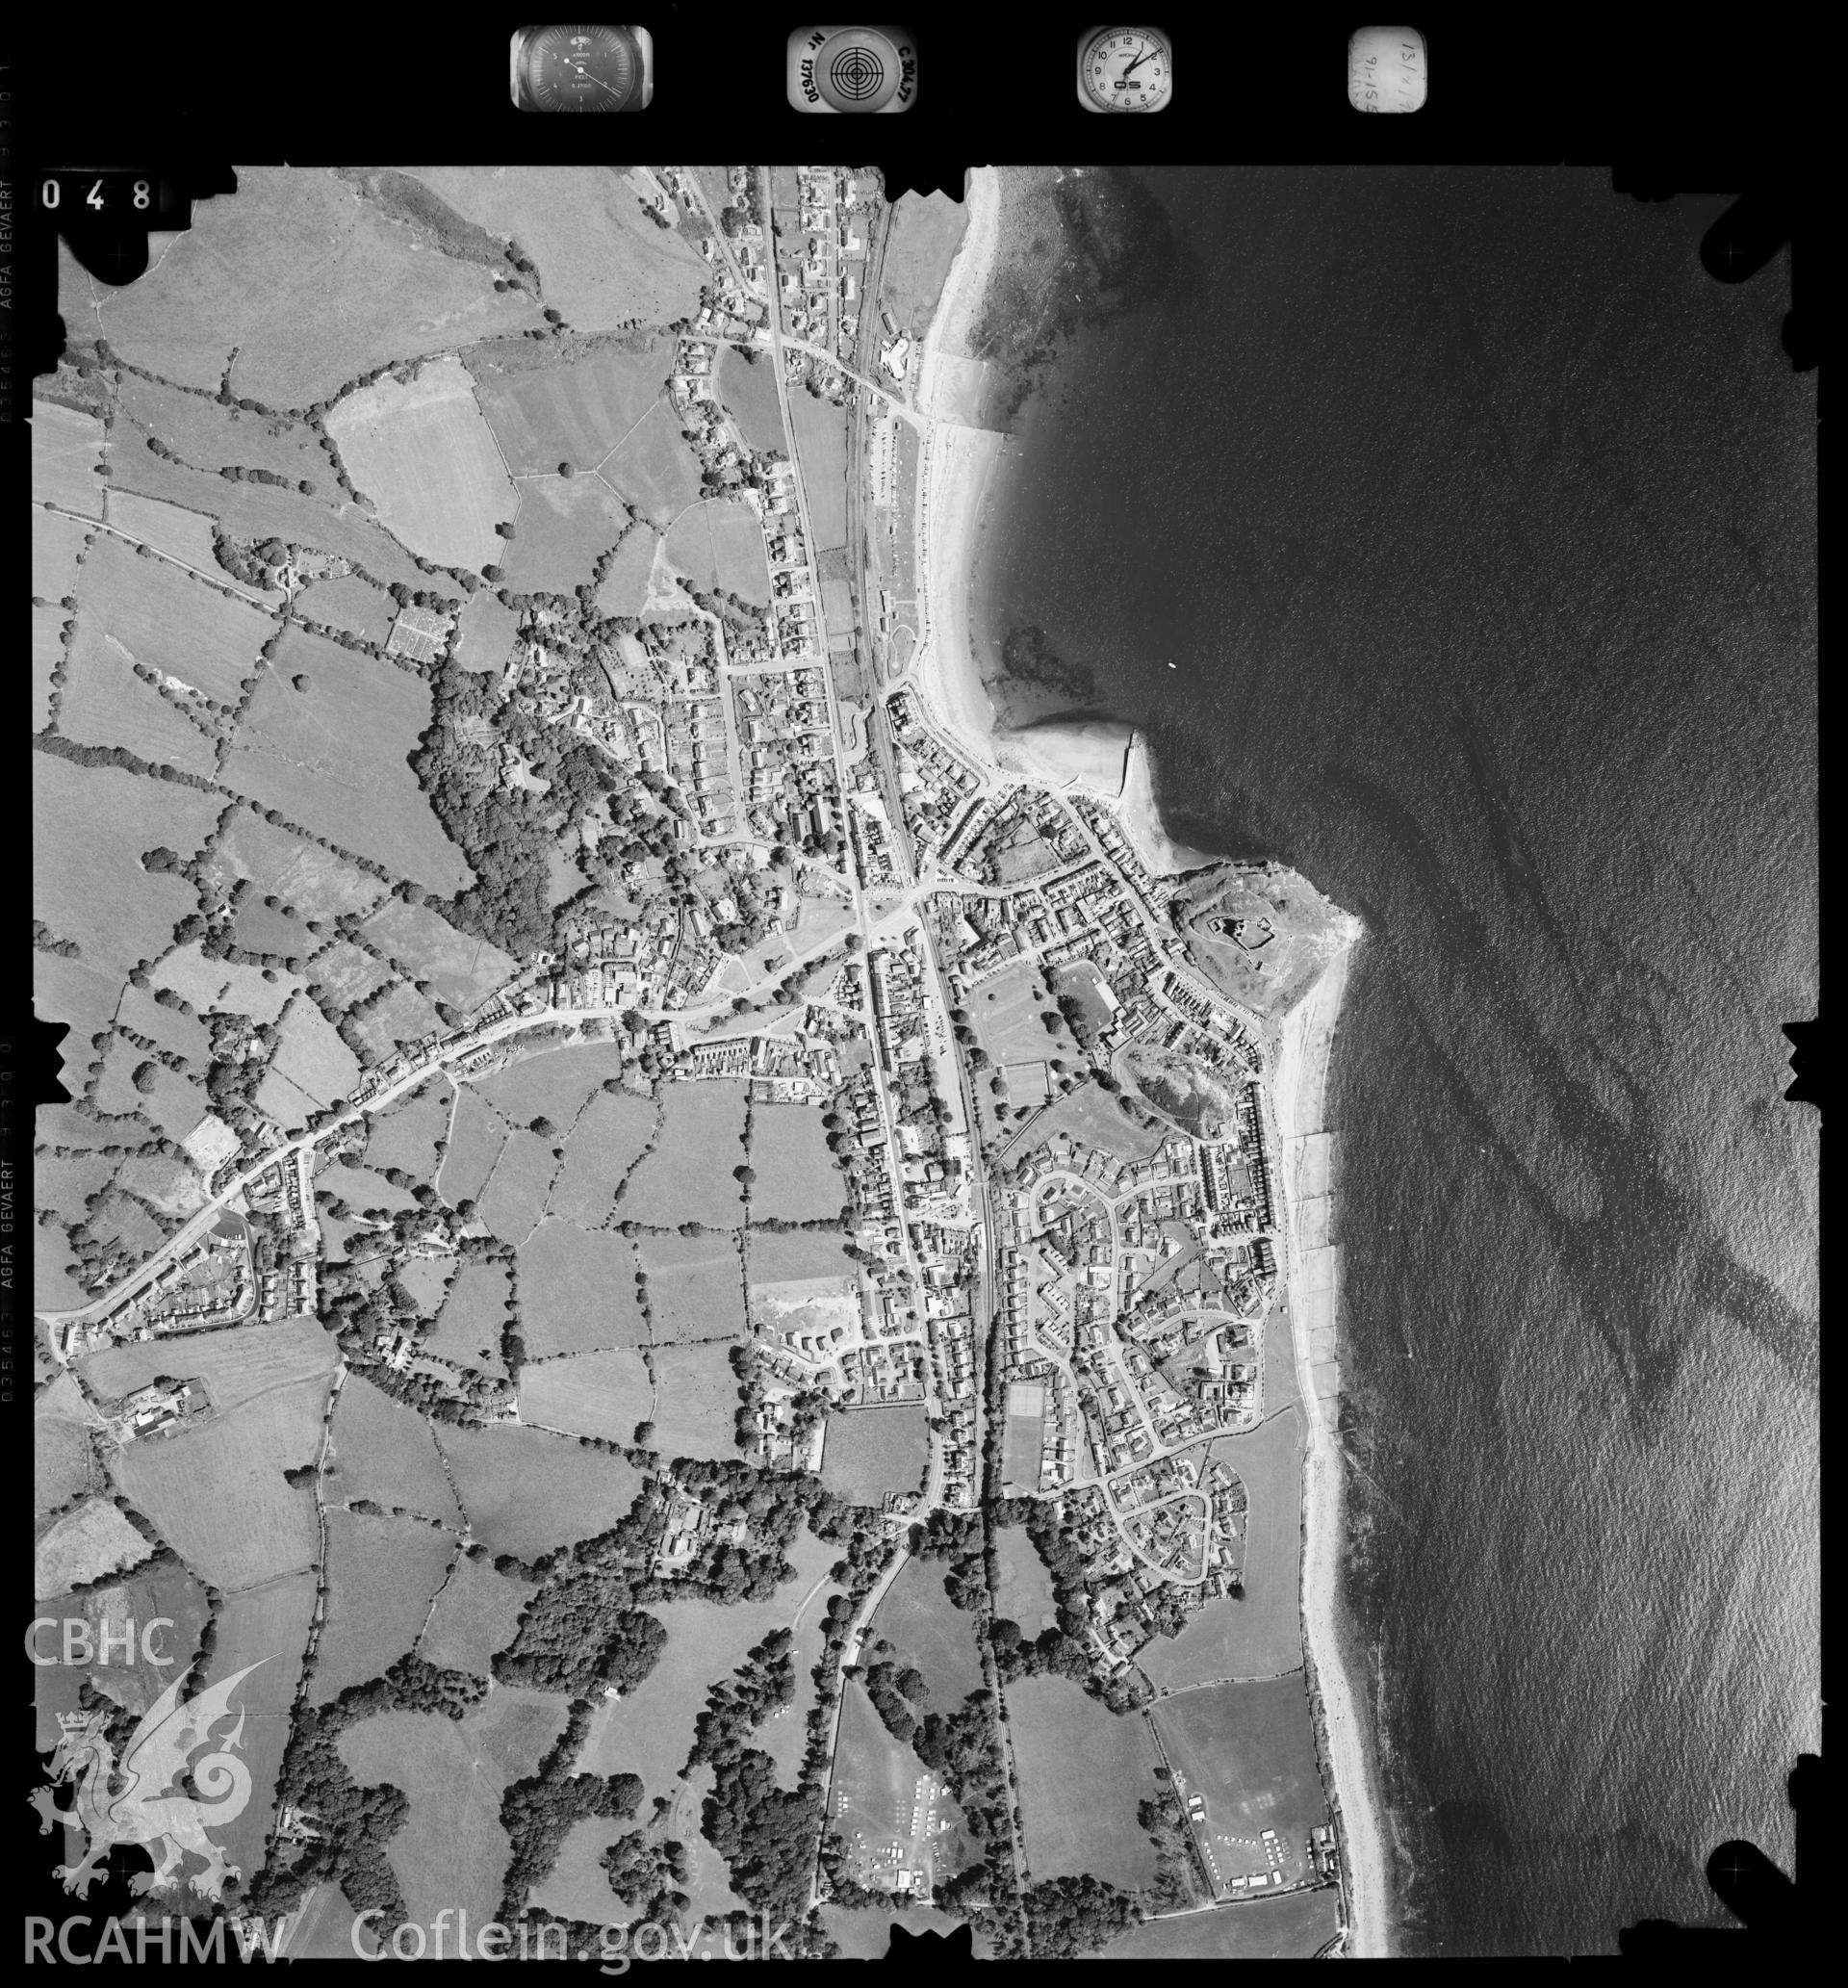 Digitized copy of an aerial photograph showing the South Lleyn area, taken by Ordnance Survey, 1991.